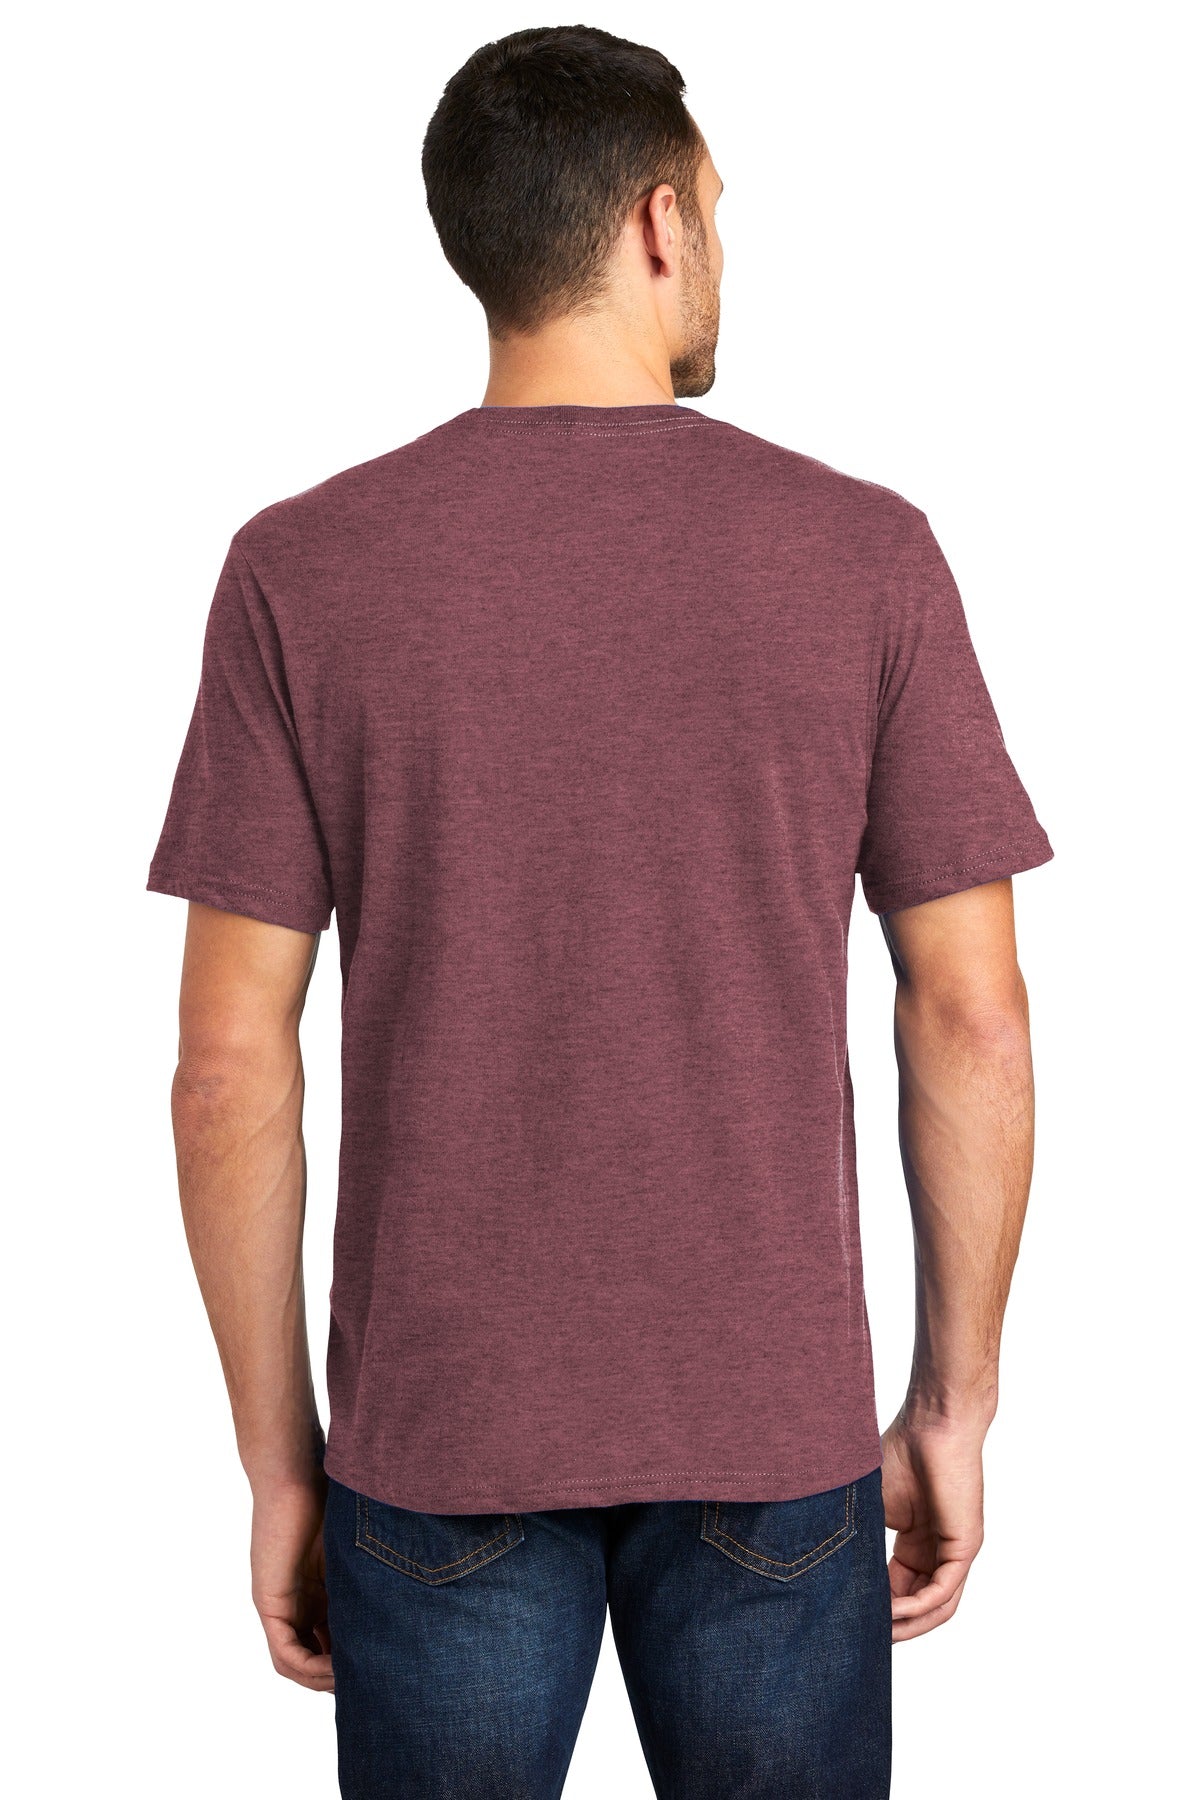 District® Very Important Tee®. DT6000 [Heathered Cardinal] - DFW Impression